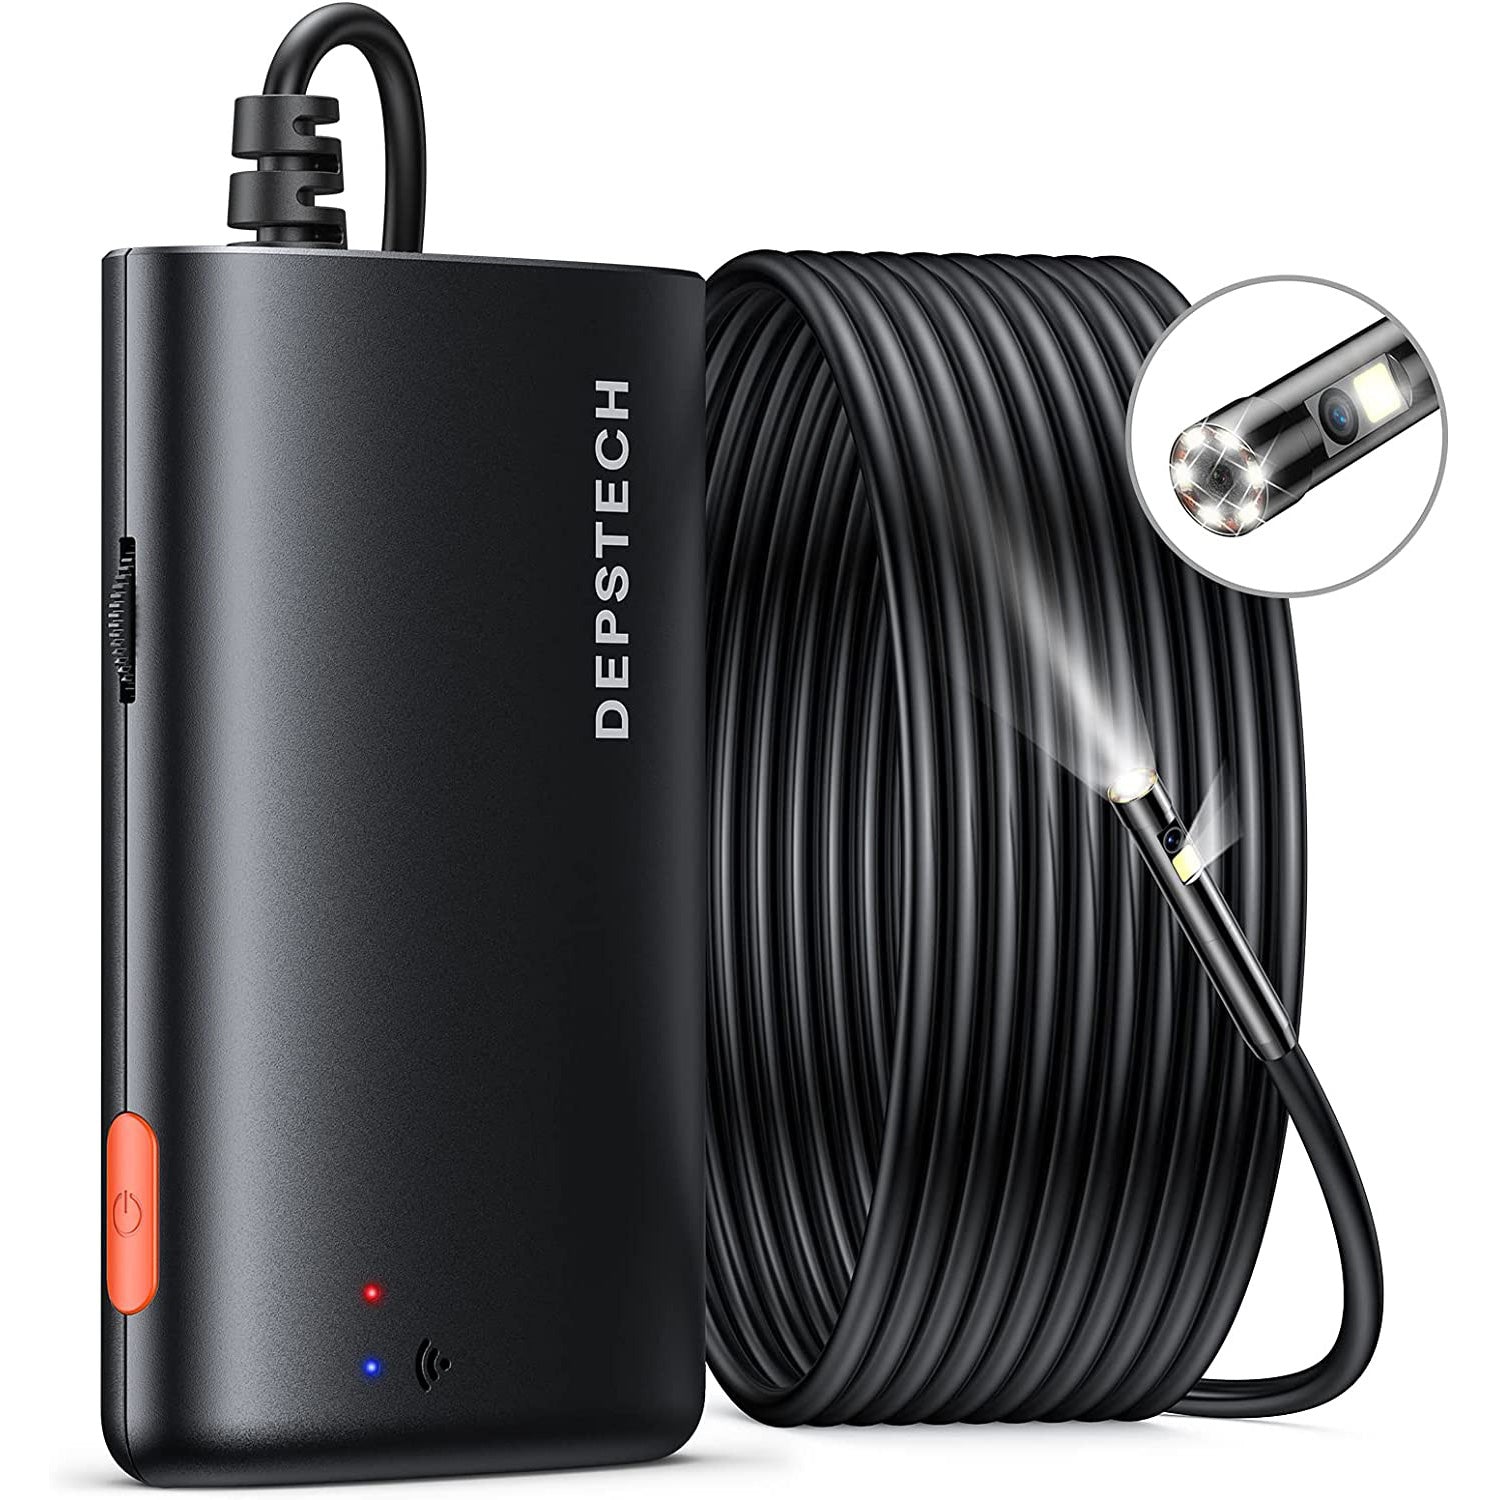 DEPSTECH WF070 Dual Lens 1080p Wireless Endoscope for iPhone & Android